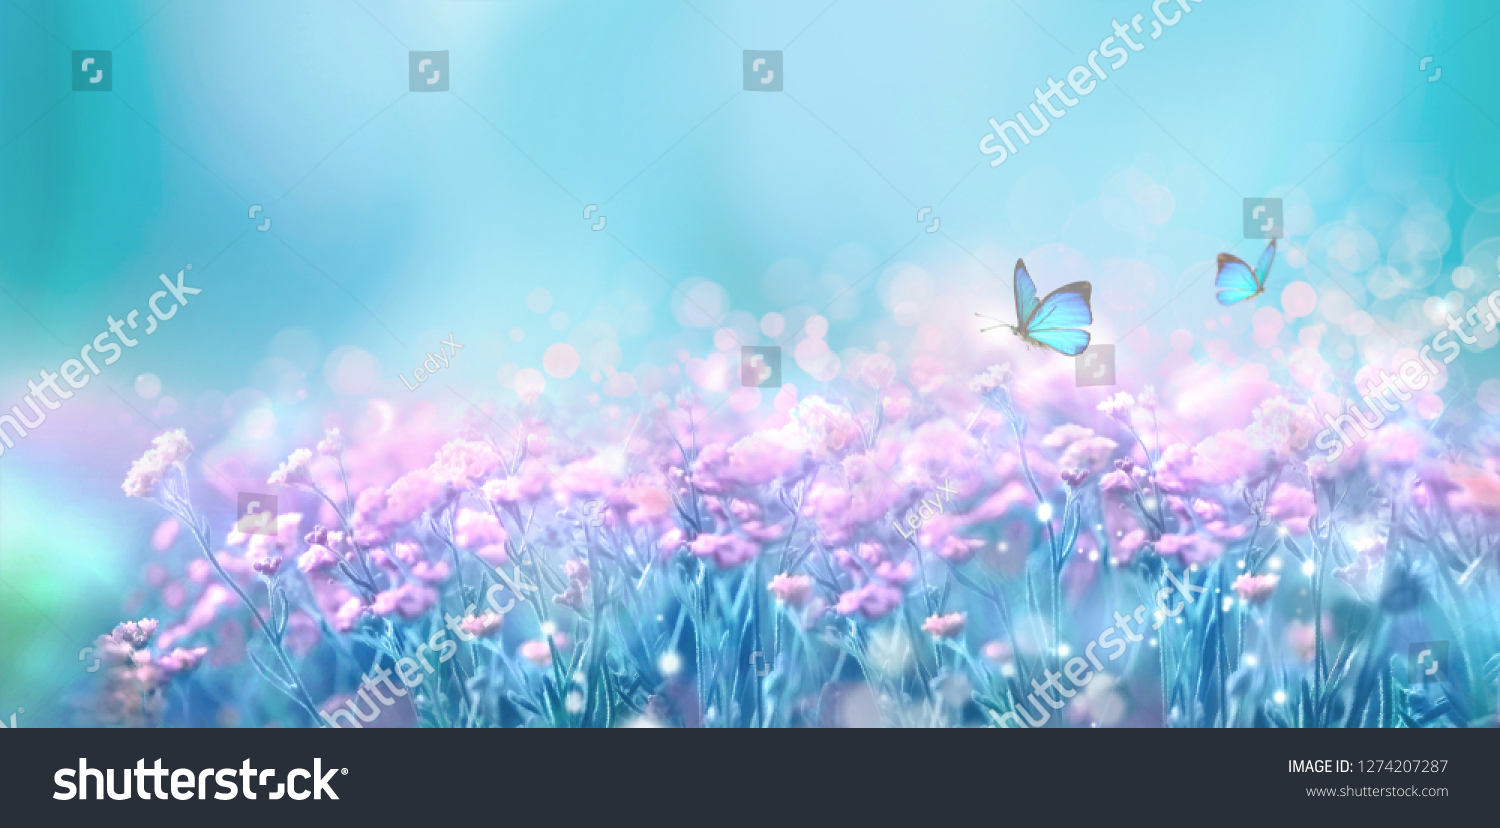 Floral spring natural landscape with wild pink lilac flowers on meadow and fluttering butterflies on blue sky background. Dreamy gentle air artistic image. Soft focus, author processing. #1274207287